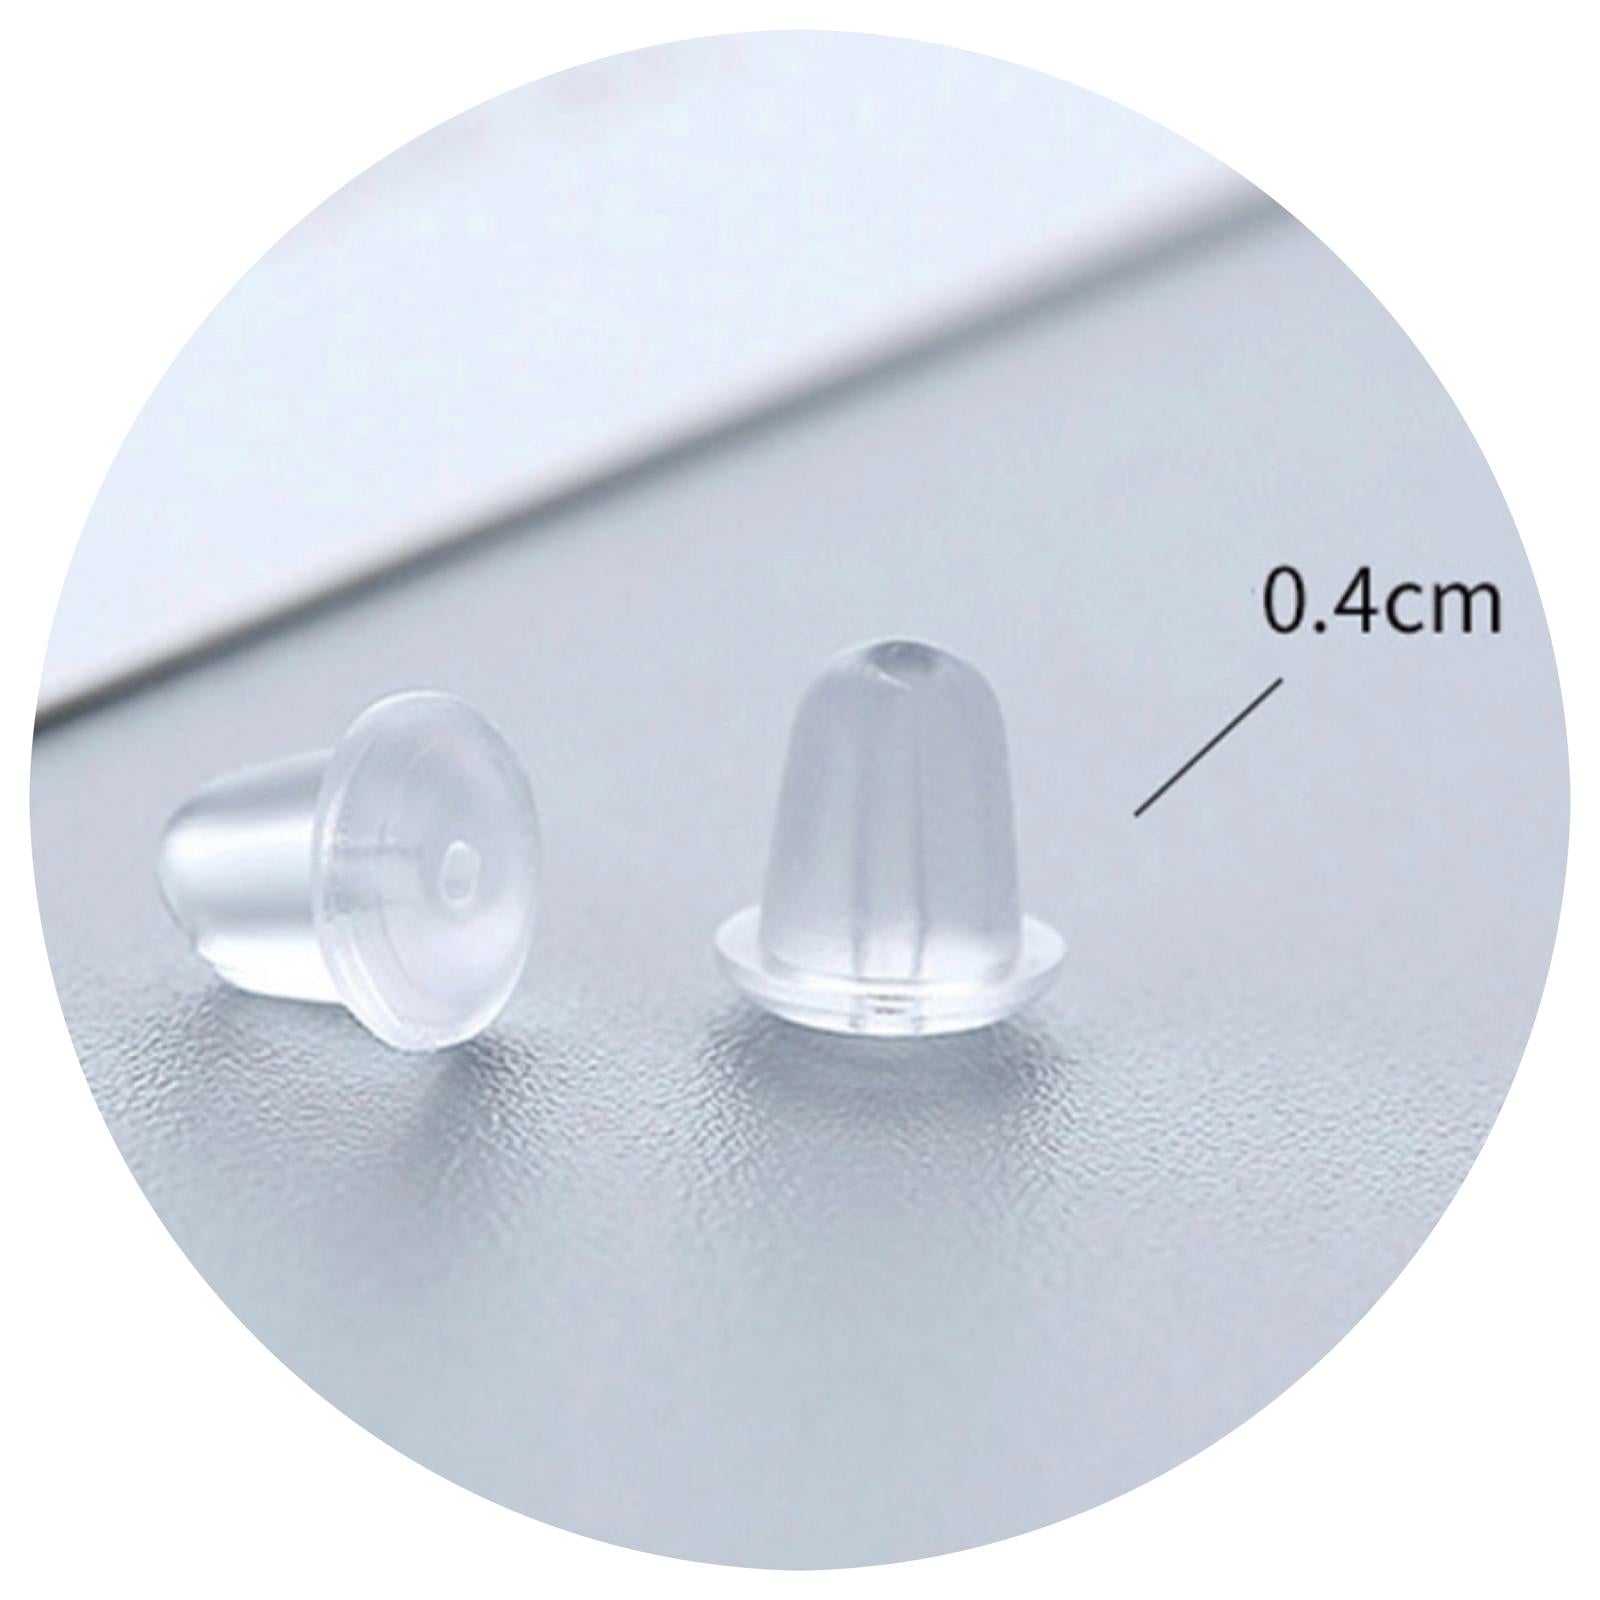 100pcs Earring Backs With Clear Pads, Soft Clear Silicone, Compatibility  With Ear Studs, Fish Hooks, Perfect For Heavy Earrings And Earring Storage  Box